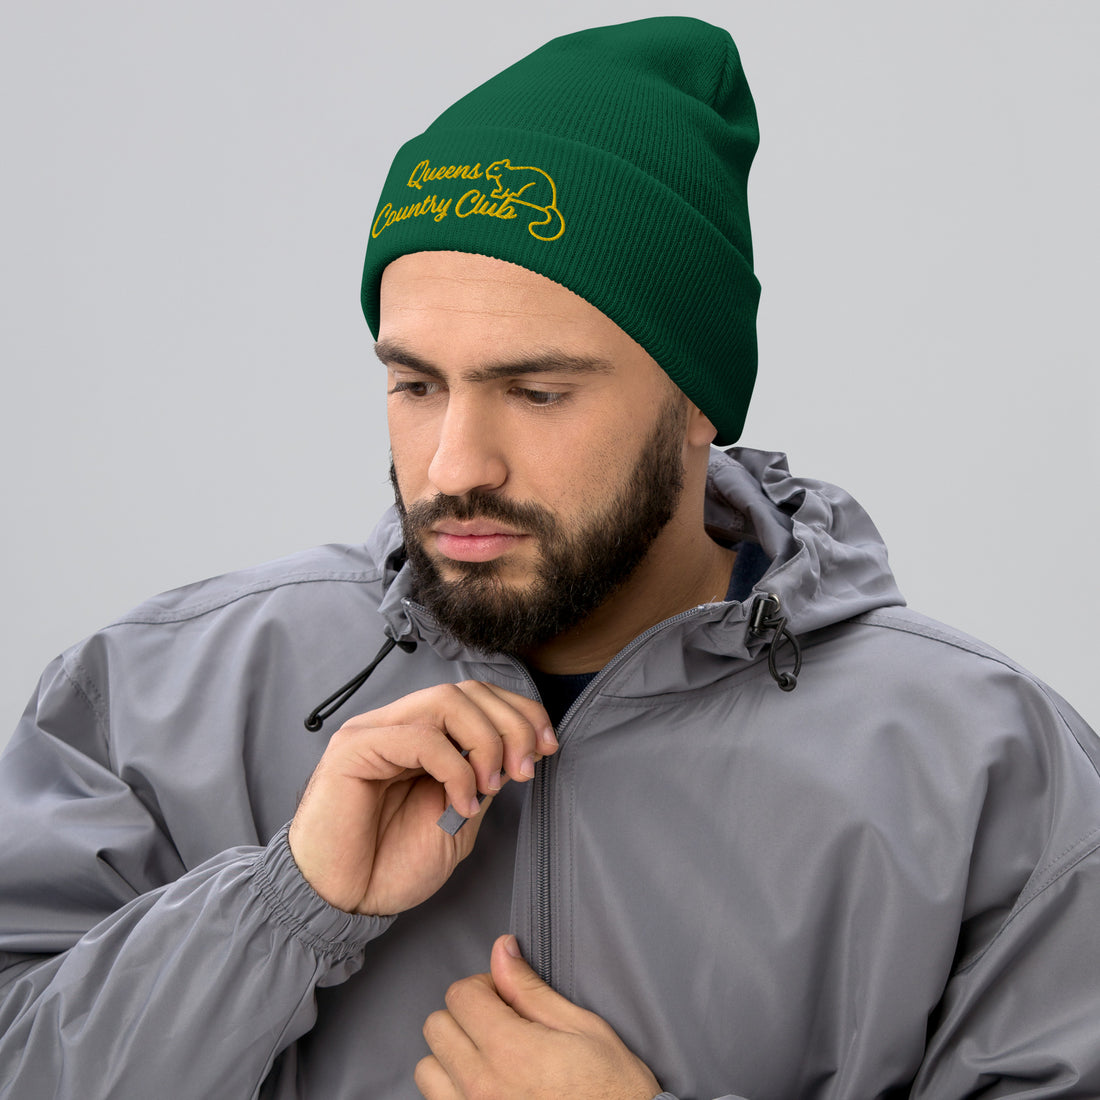 Queens Country Club with Squirrel Embroidery Cuffed Beanie